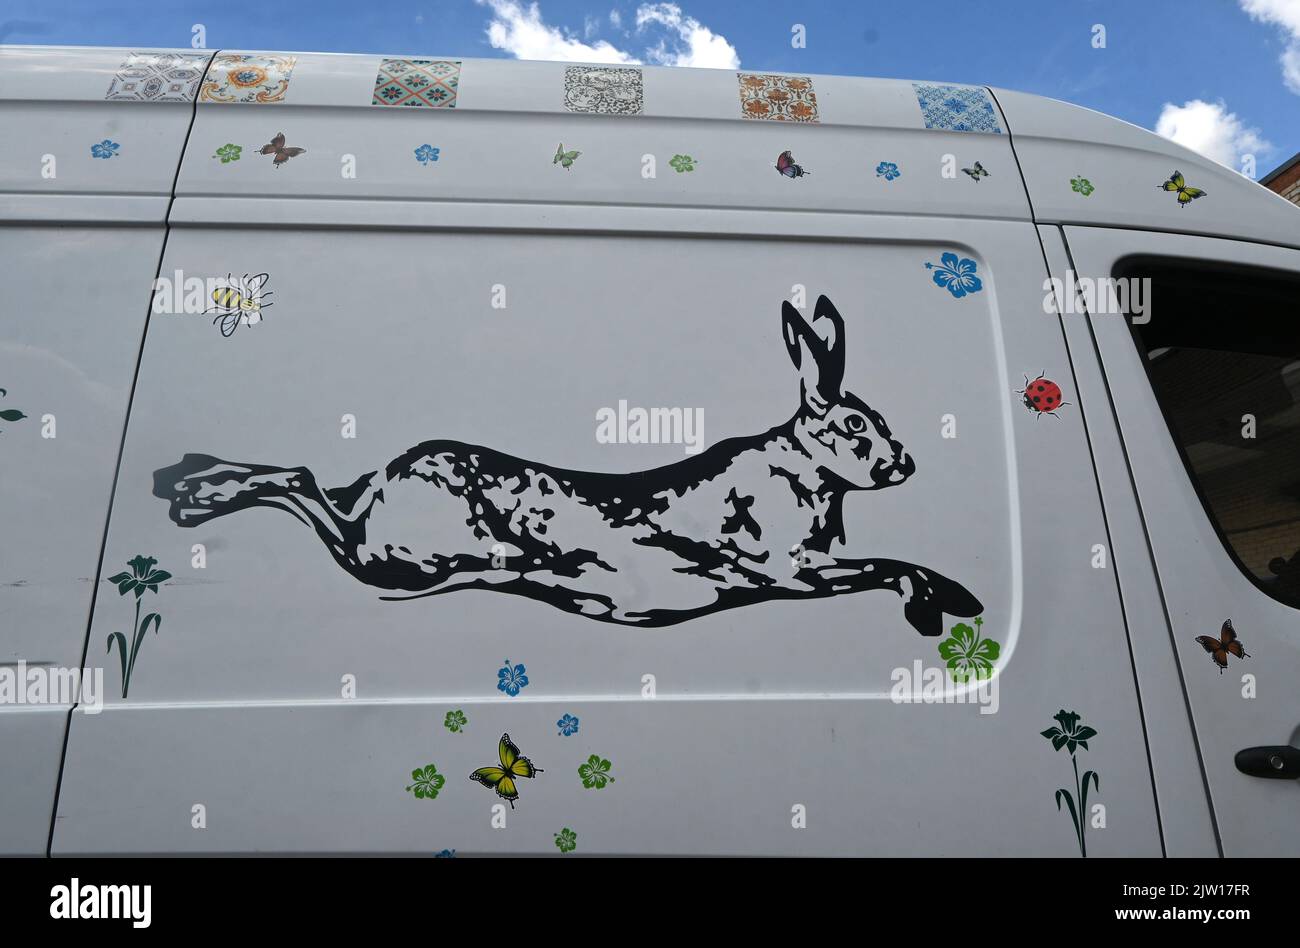 van decorated with flowers and animals Stock Photo